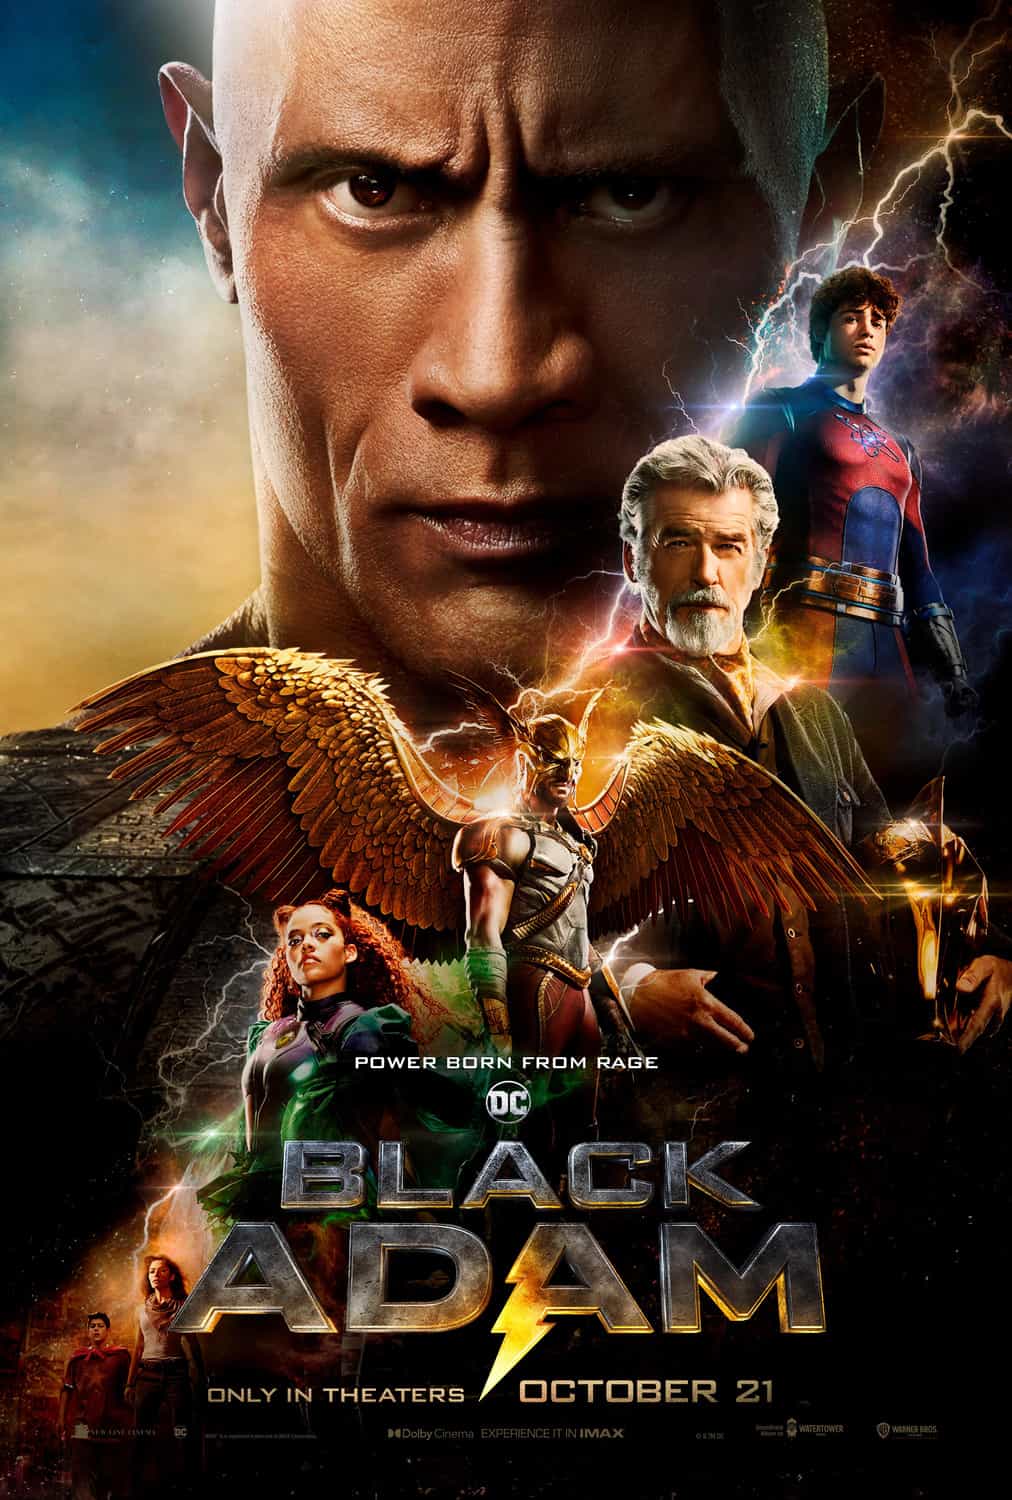 This weeks UK new movie preview 21st October 2022 - Black Adam, The Roundup, Decision to Leave, The Banshees of Inisherin, The School For Good and Evil, Raymond and Ray, My Policeman and Vesp